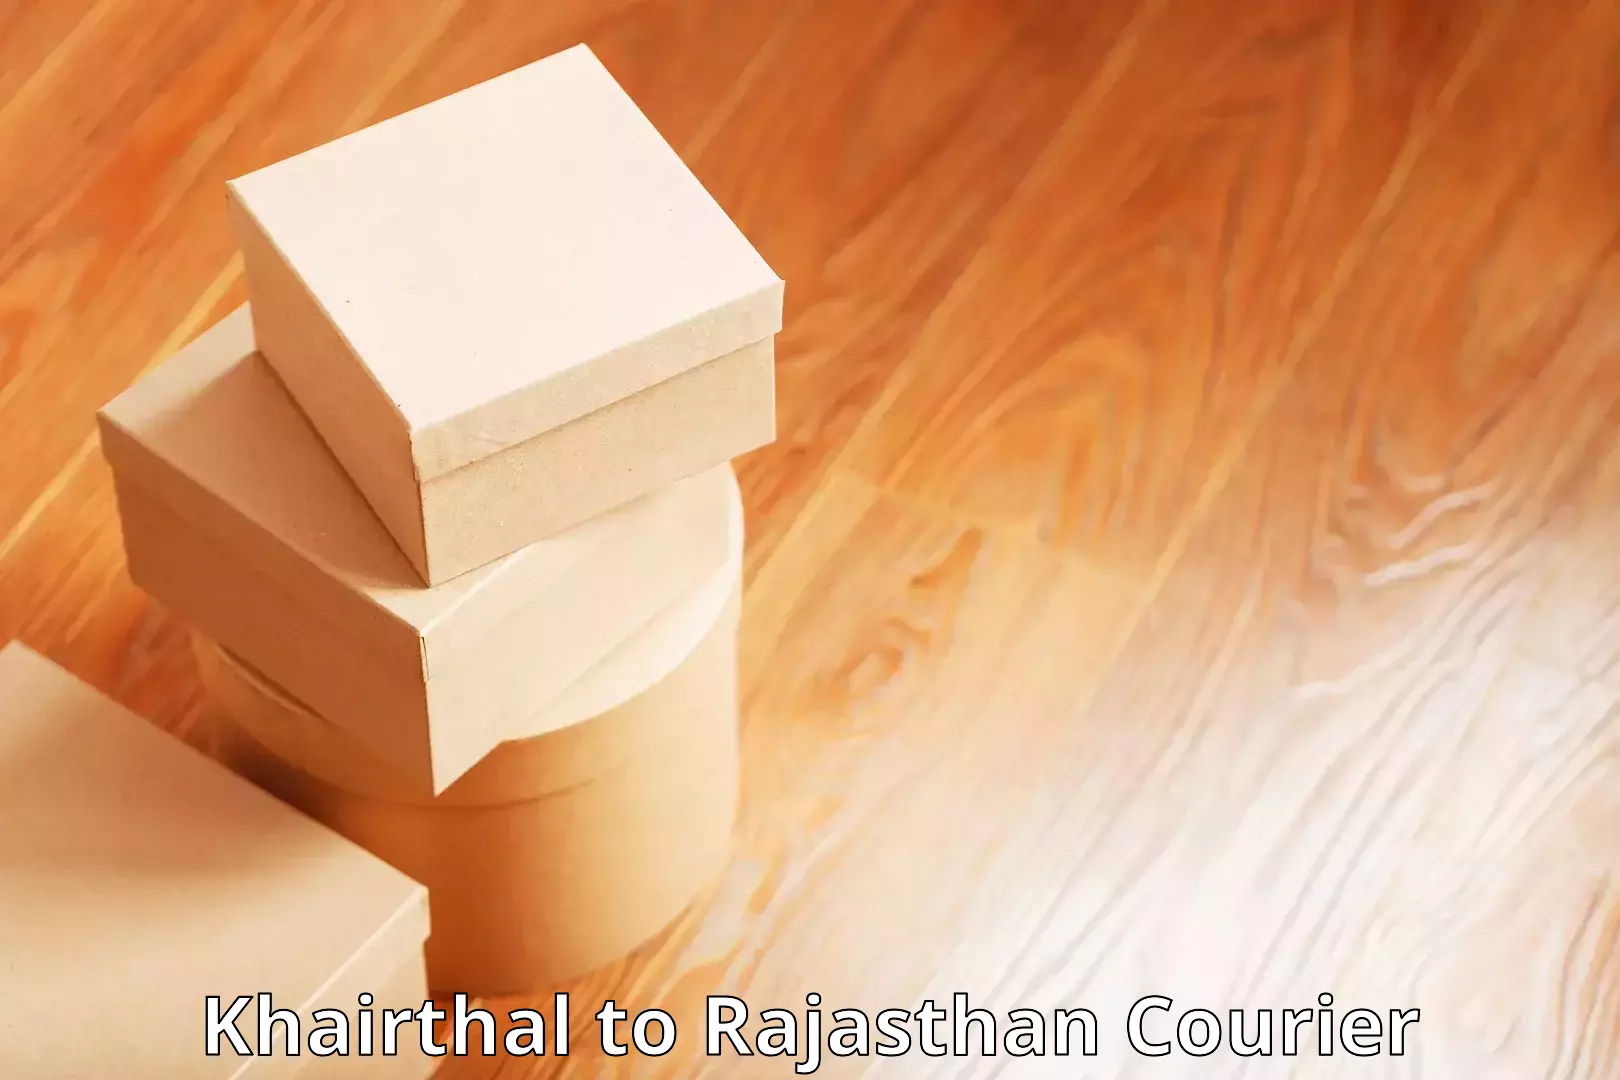 Subscription-based courier Khairthal to Mathania